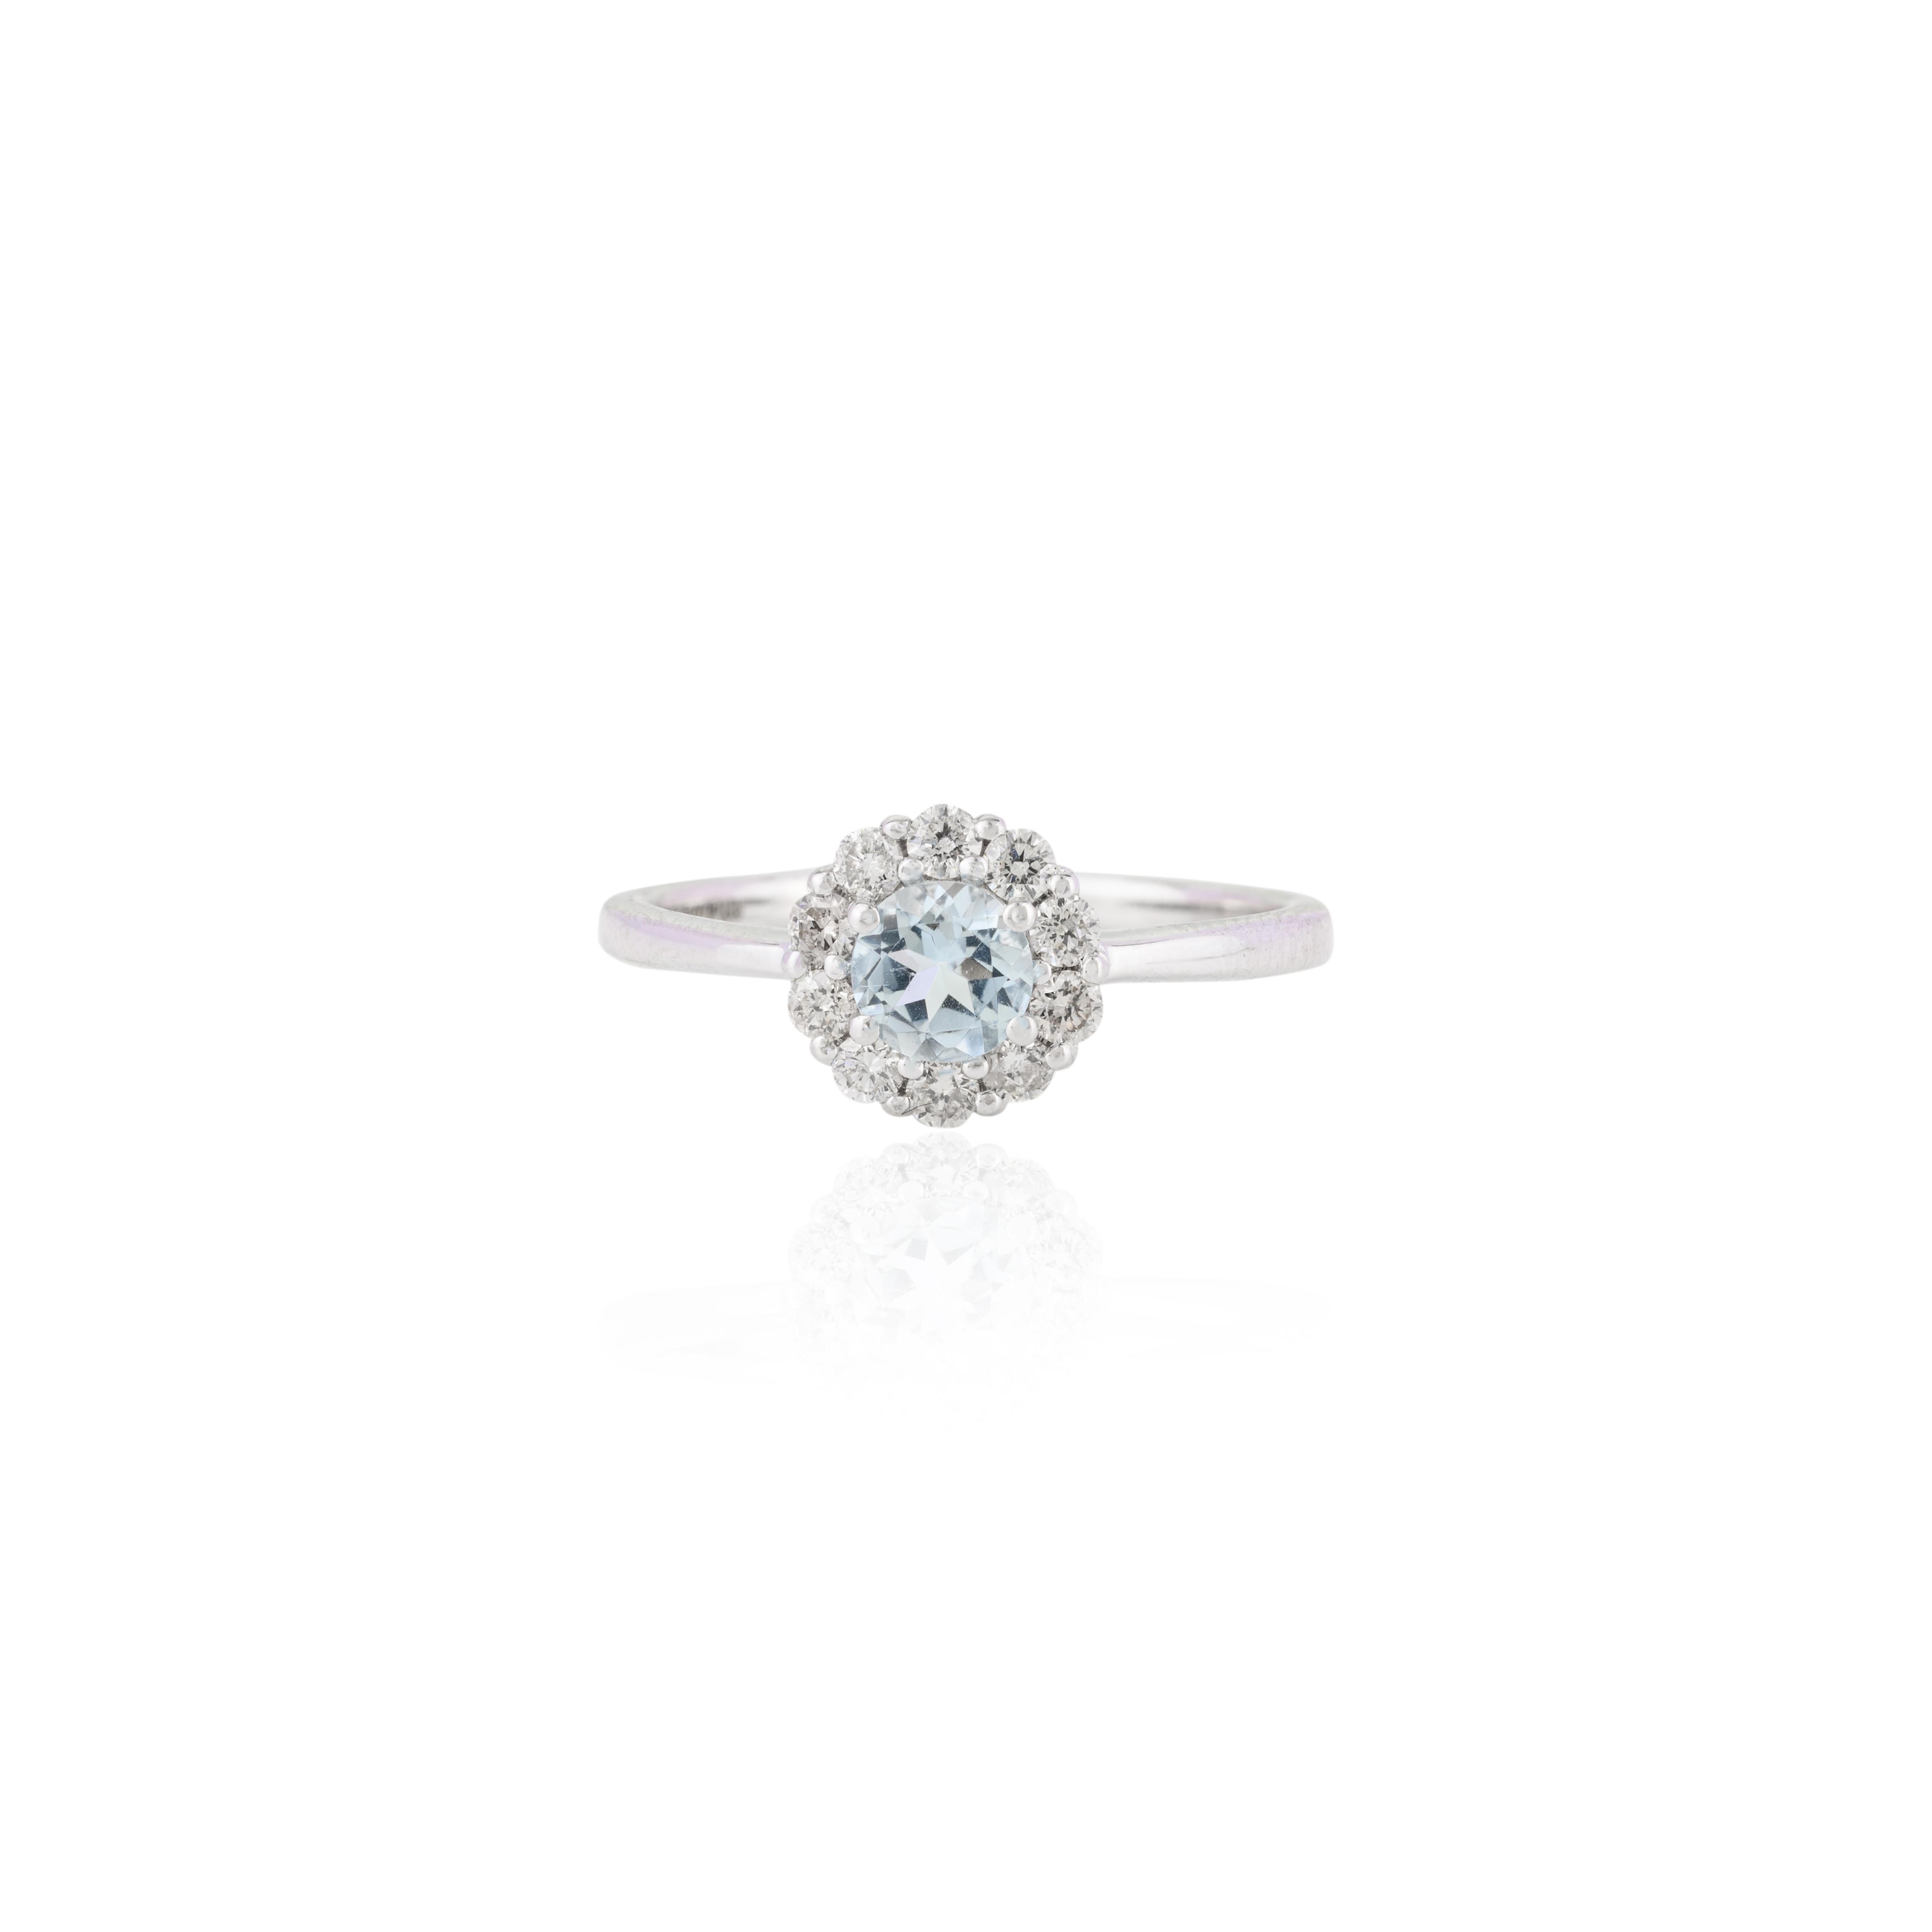 For Sale:  Dainty Aquamarine Halo Diamond Ring Gift for Girlfriend in 14k White Gold 8